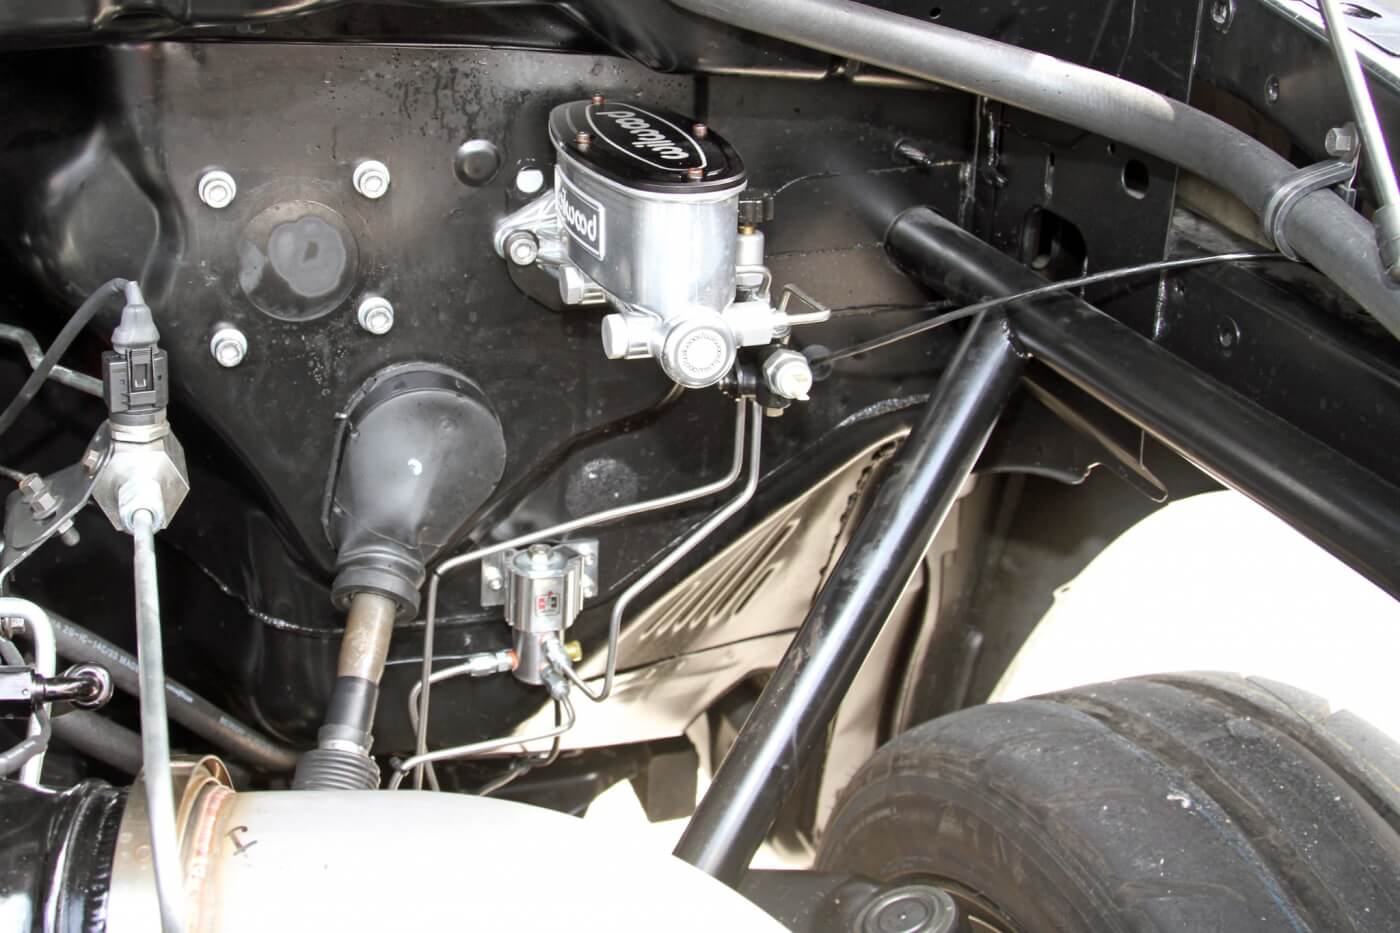 The firewall has been greatly simplified with the factory master cylinder and brake booster removed to make way for the Wilwood master cylinder and Hurst roll control solenoid. You can also see where the roll cage exits the firewall and is tied into the front of the factory frame.